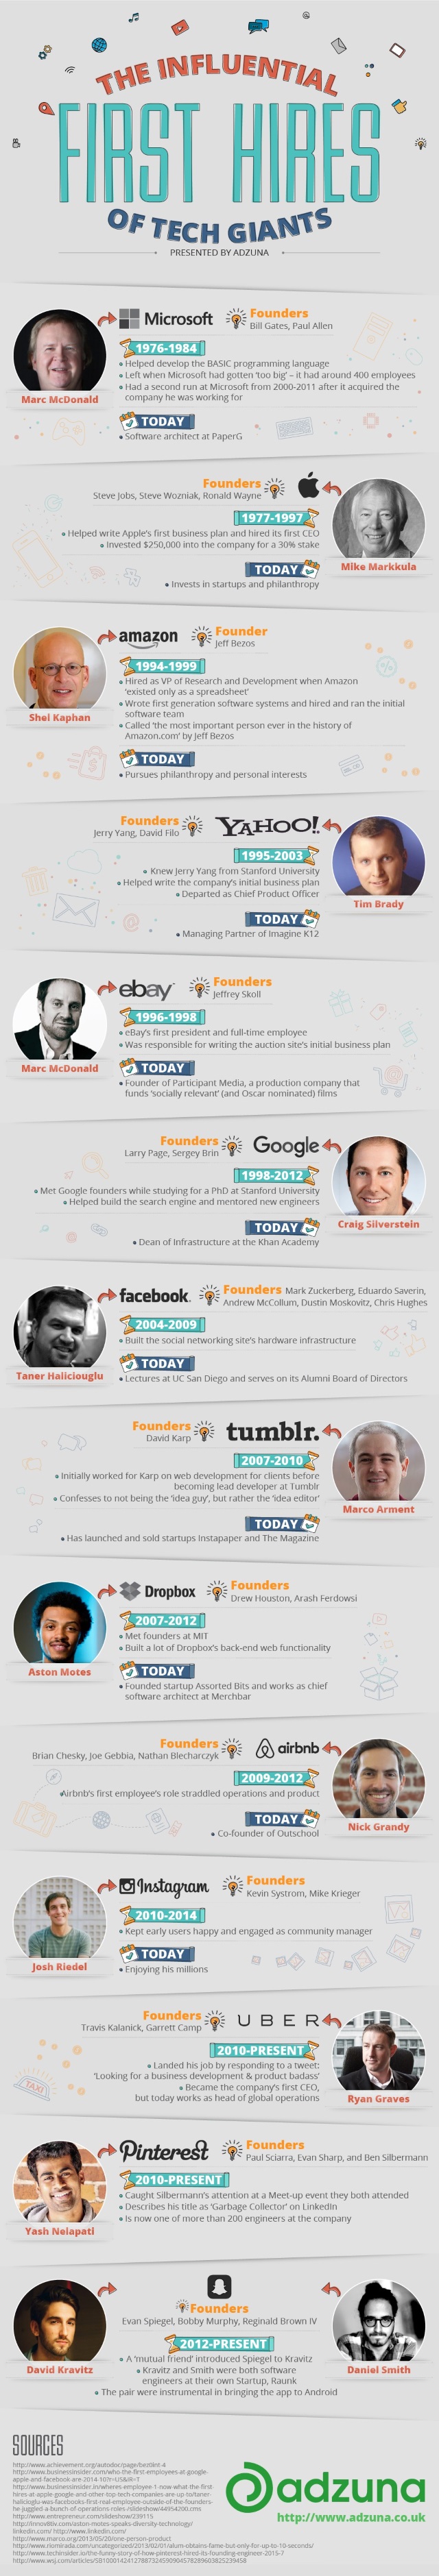 First hires infographic